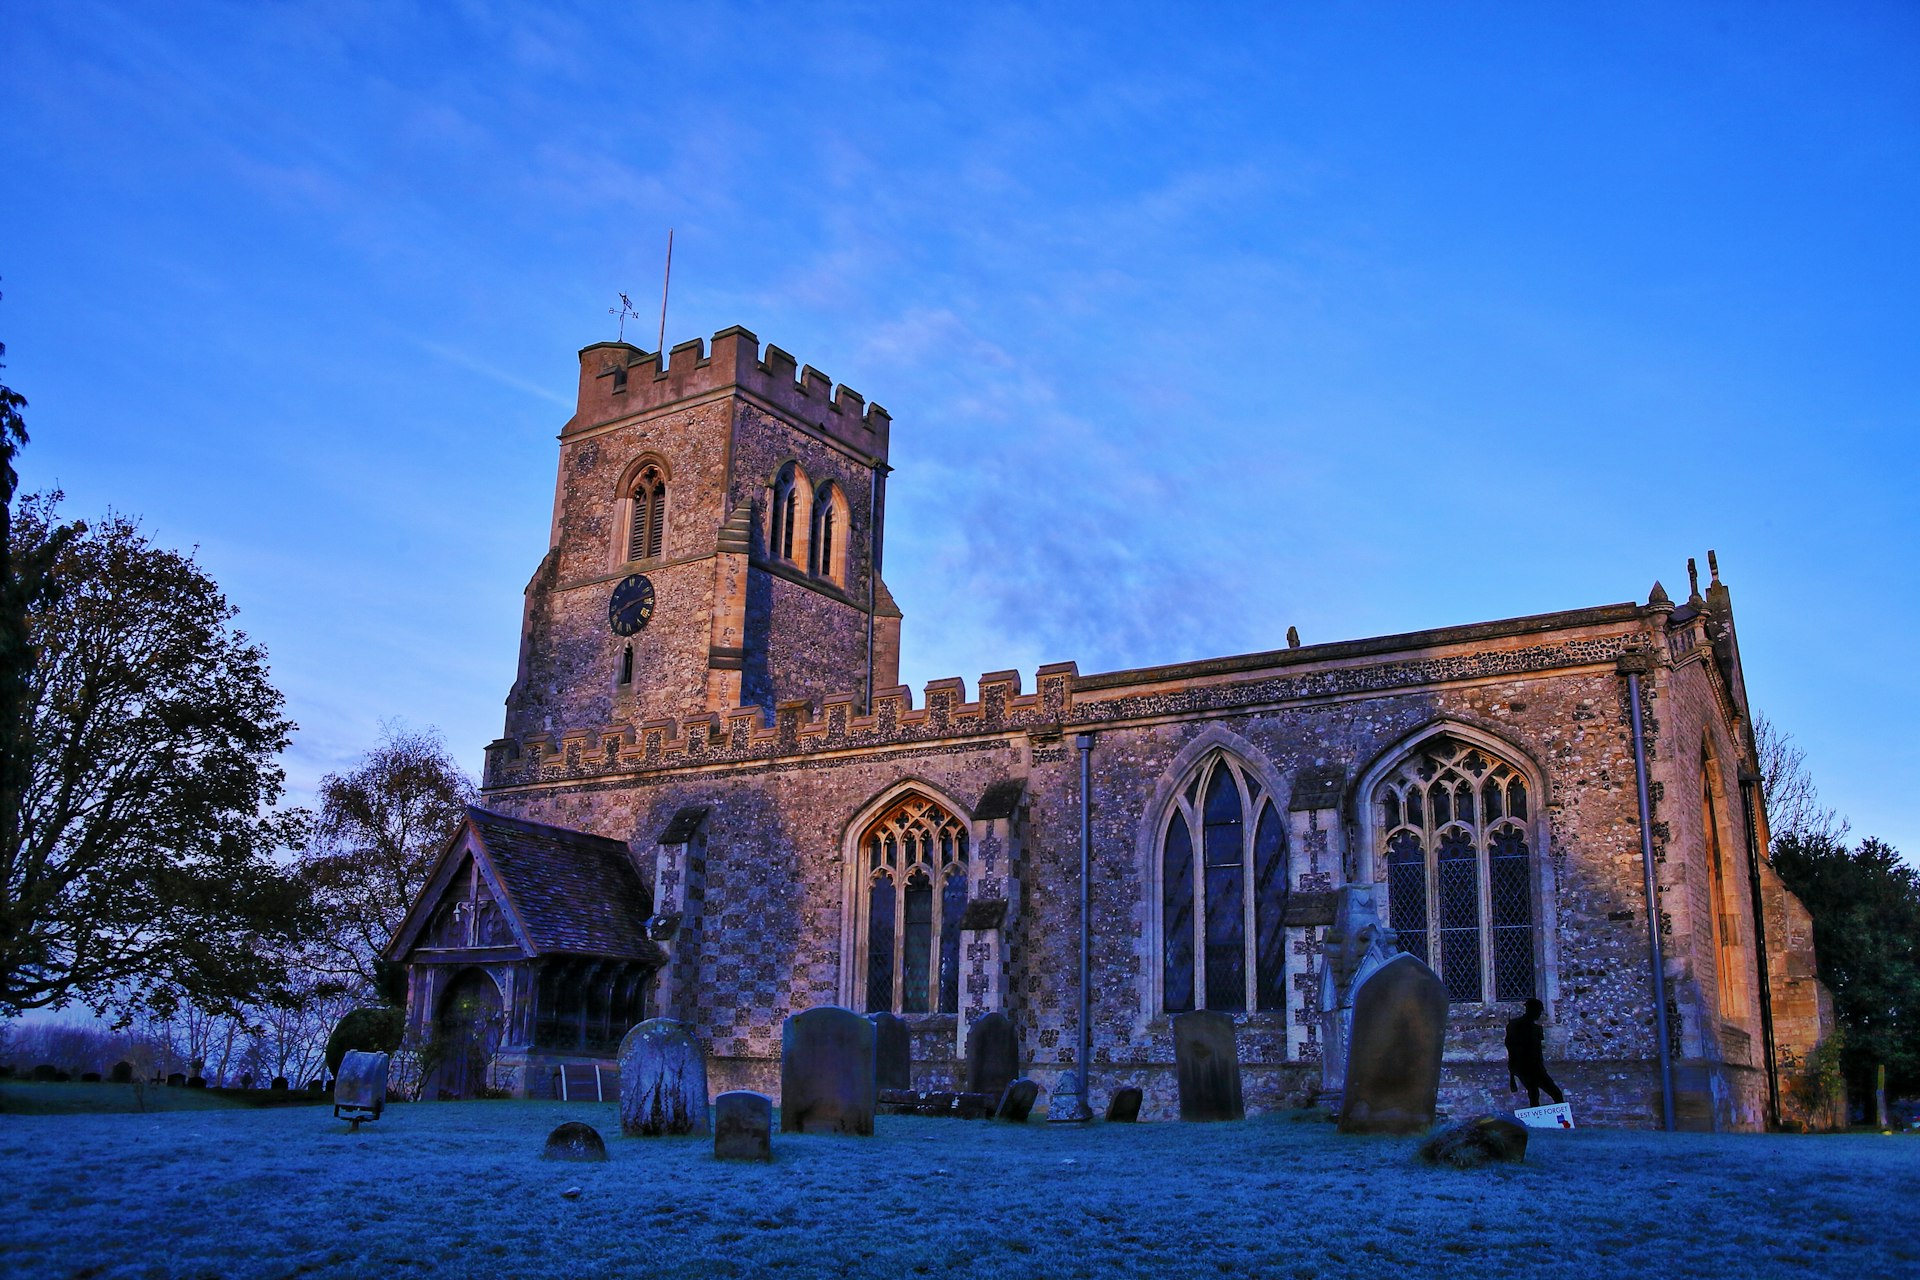 The outside of All Saints Church at dusk. A number of headstones are visible on the grass in front.